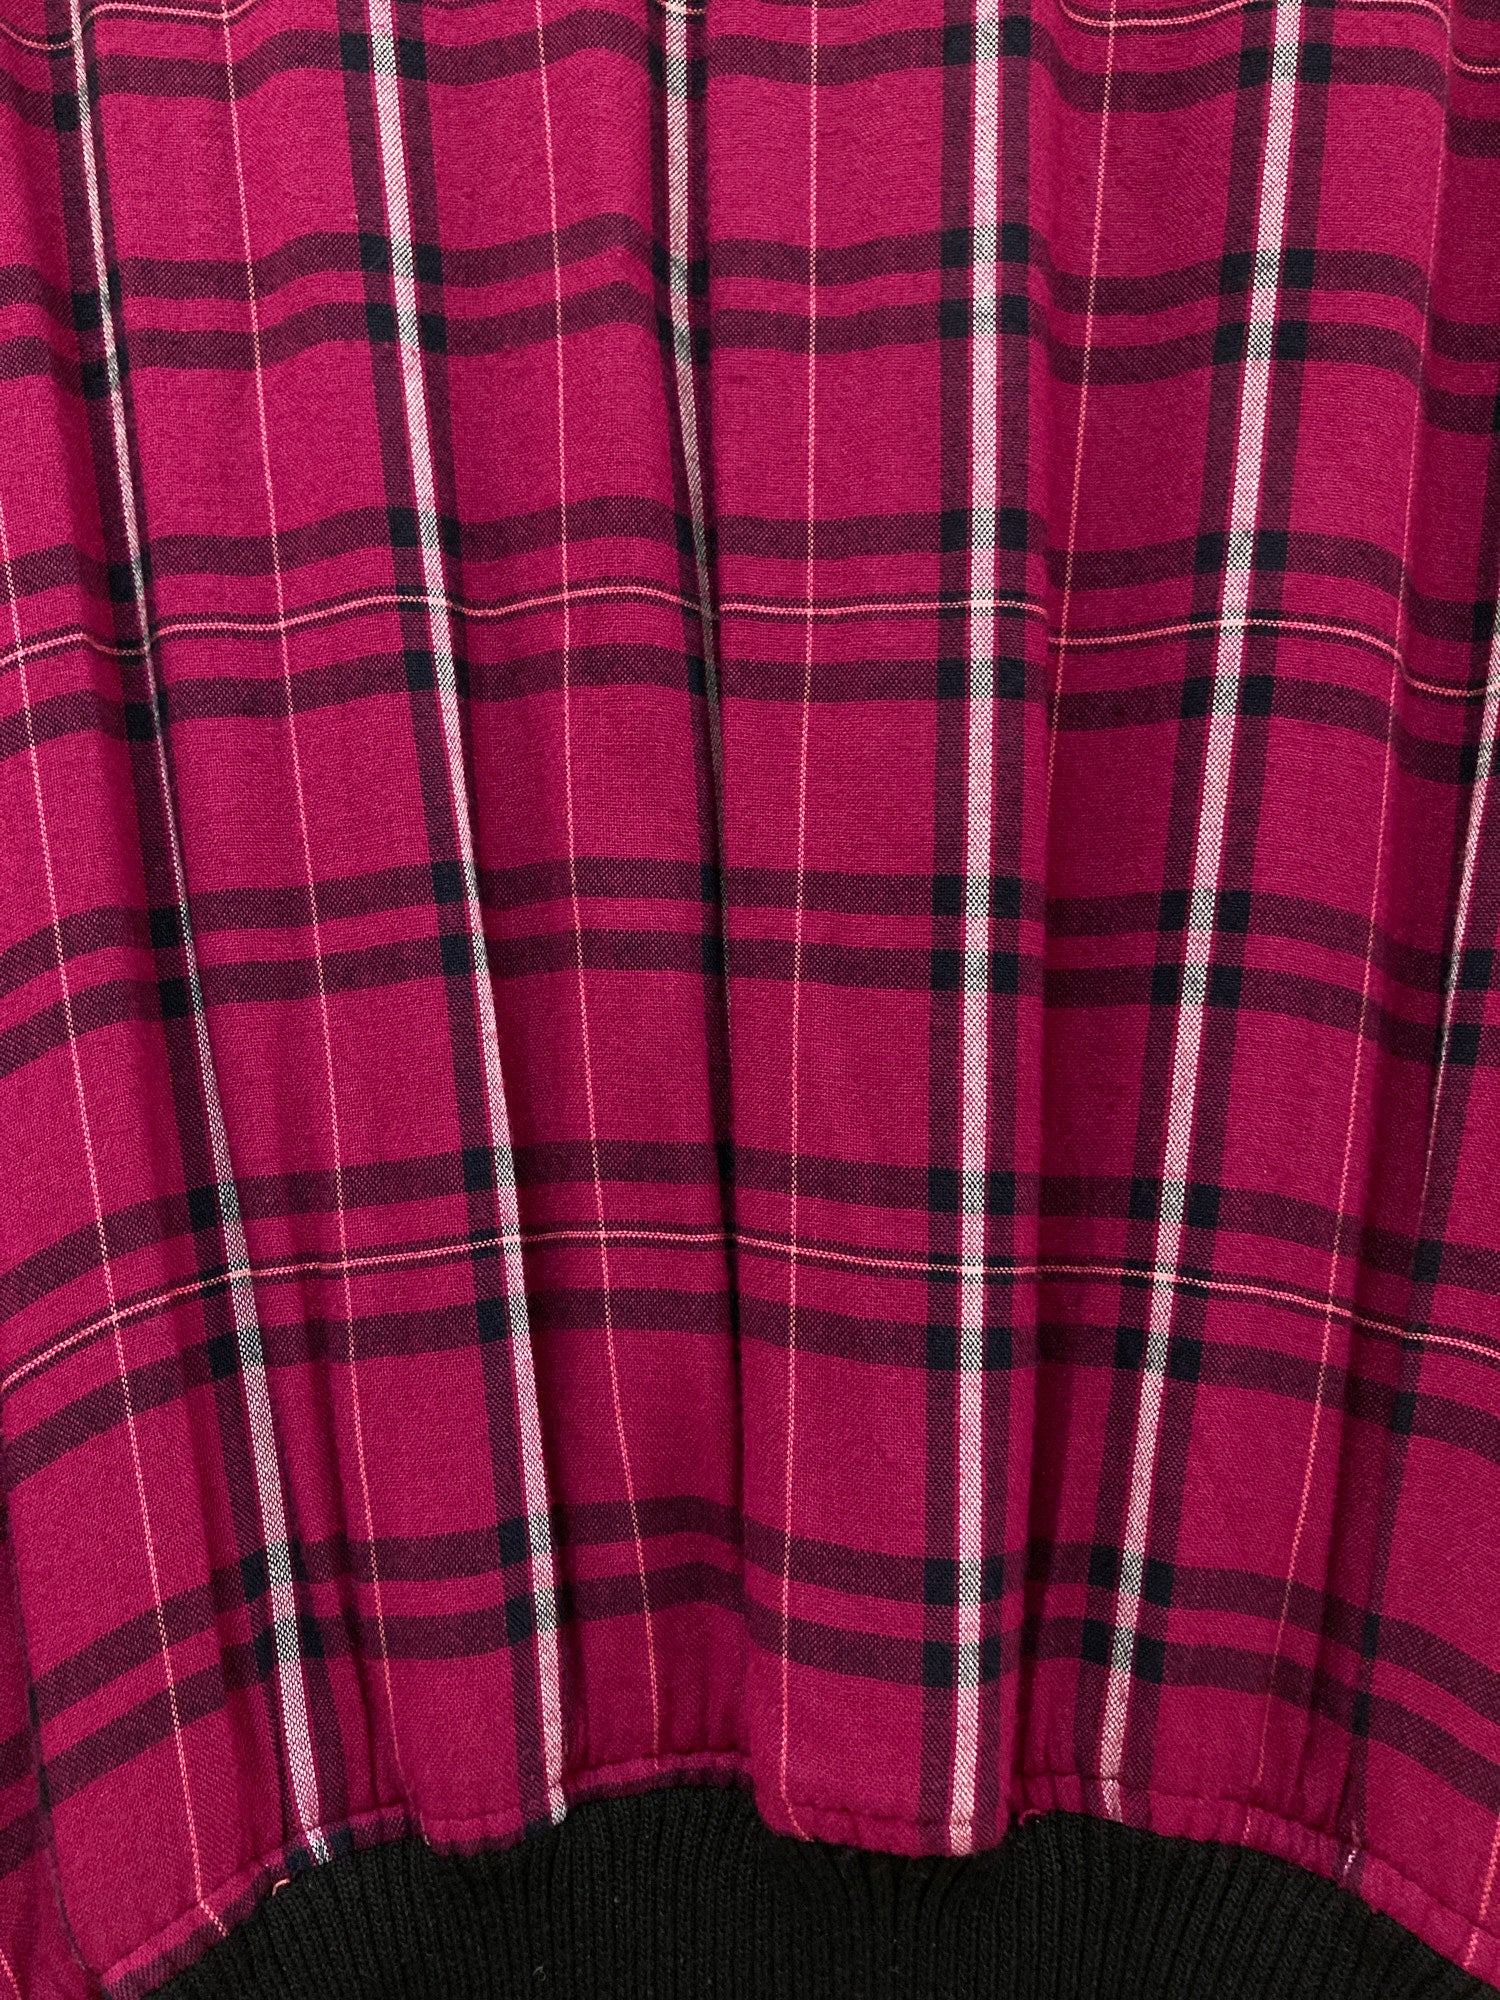 Tricot Comme des Garcons 1980s purple plaid creased rayon bomber jacket